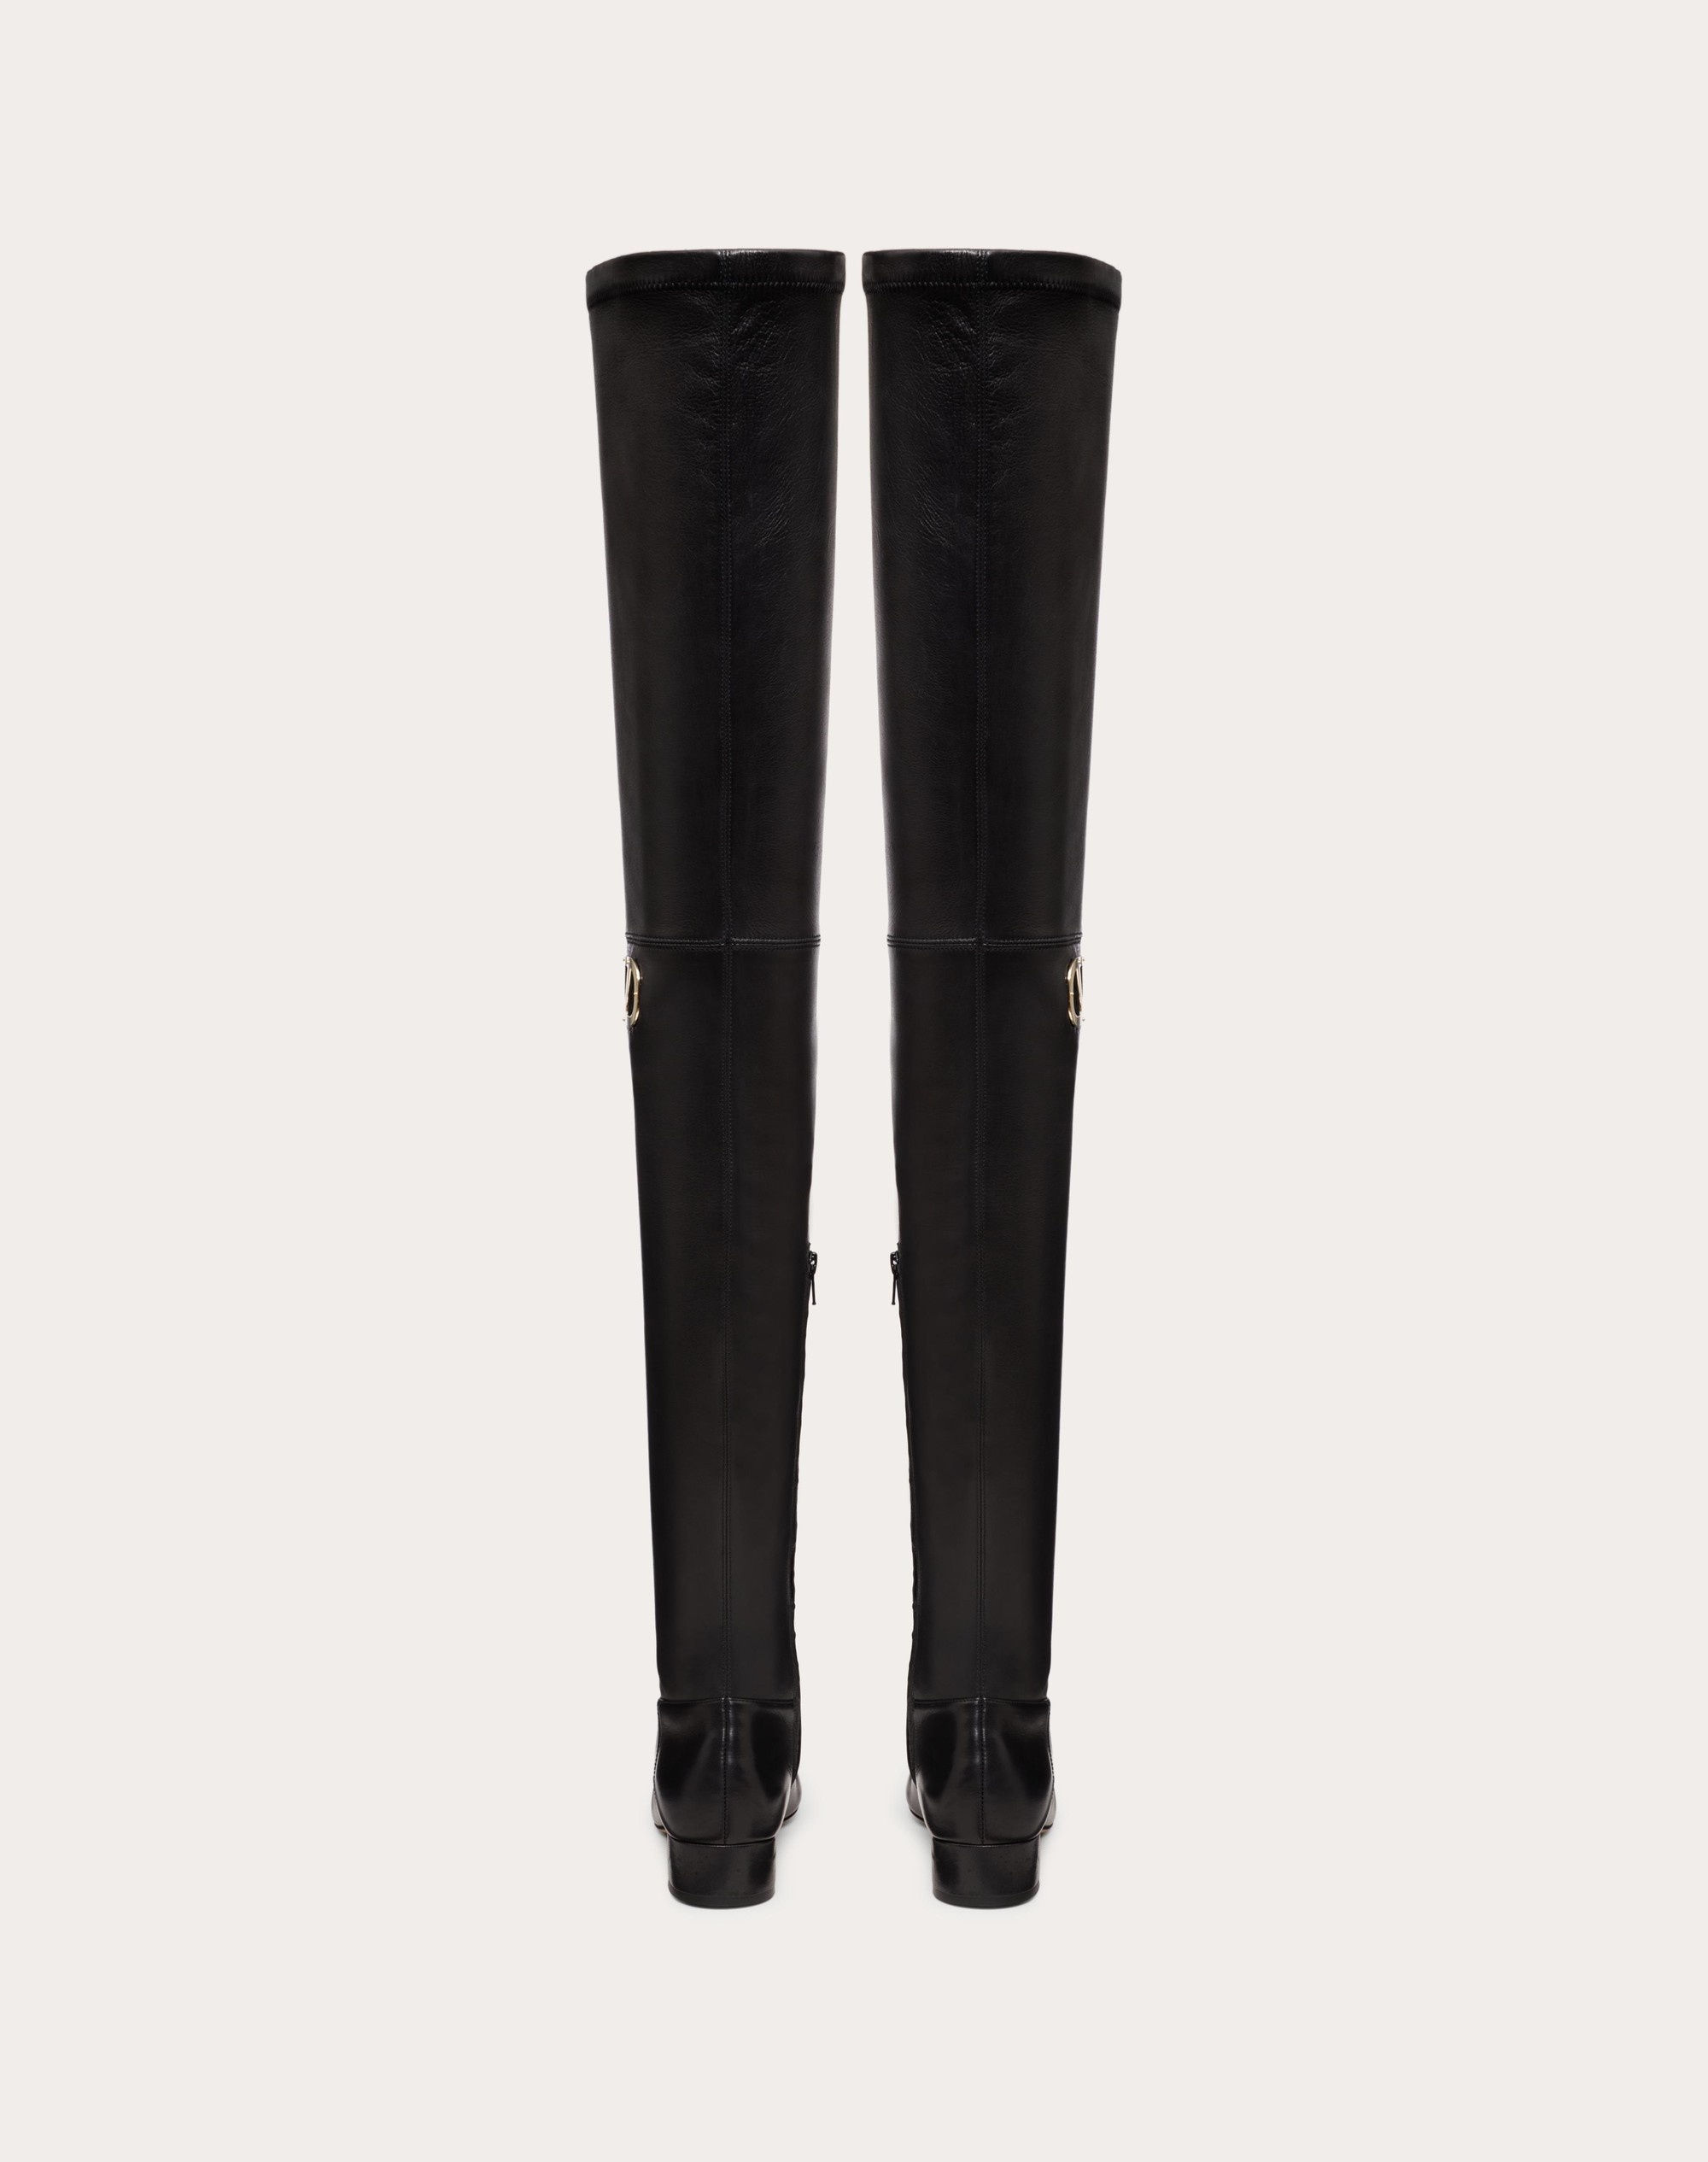 VLOGO TYPE OVER-THE-KNEE BOOT IN STRETCH NAPPA 30MM - 3